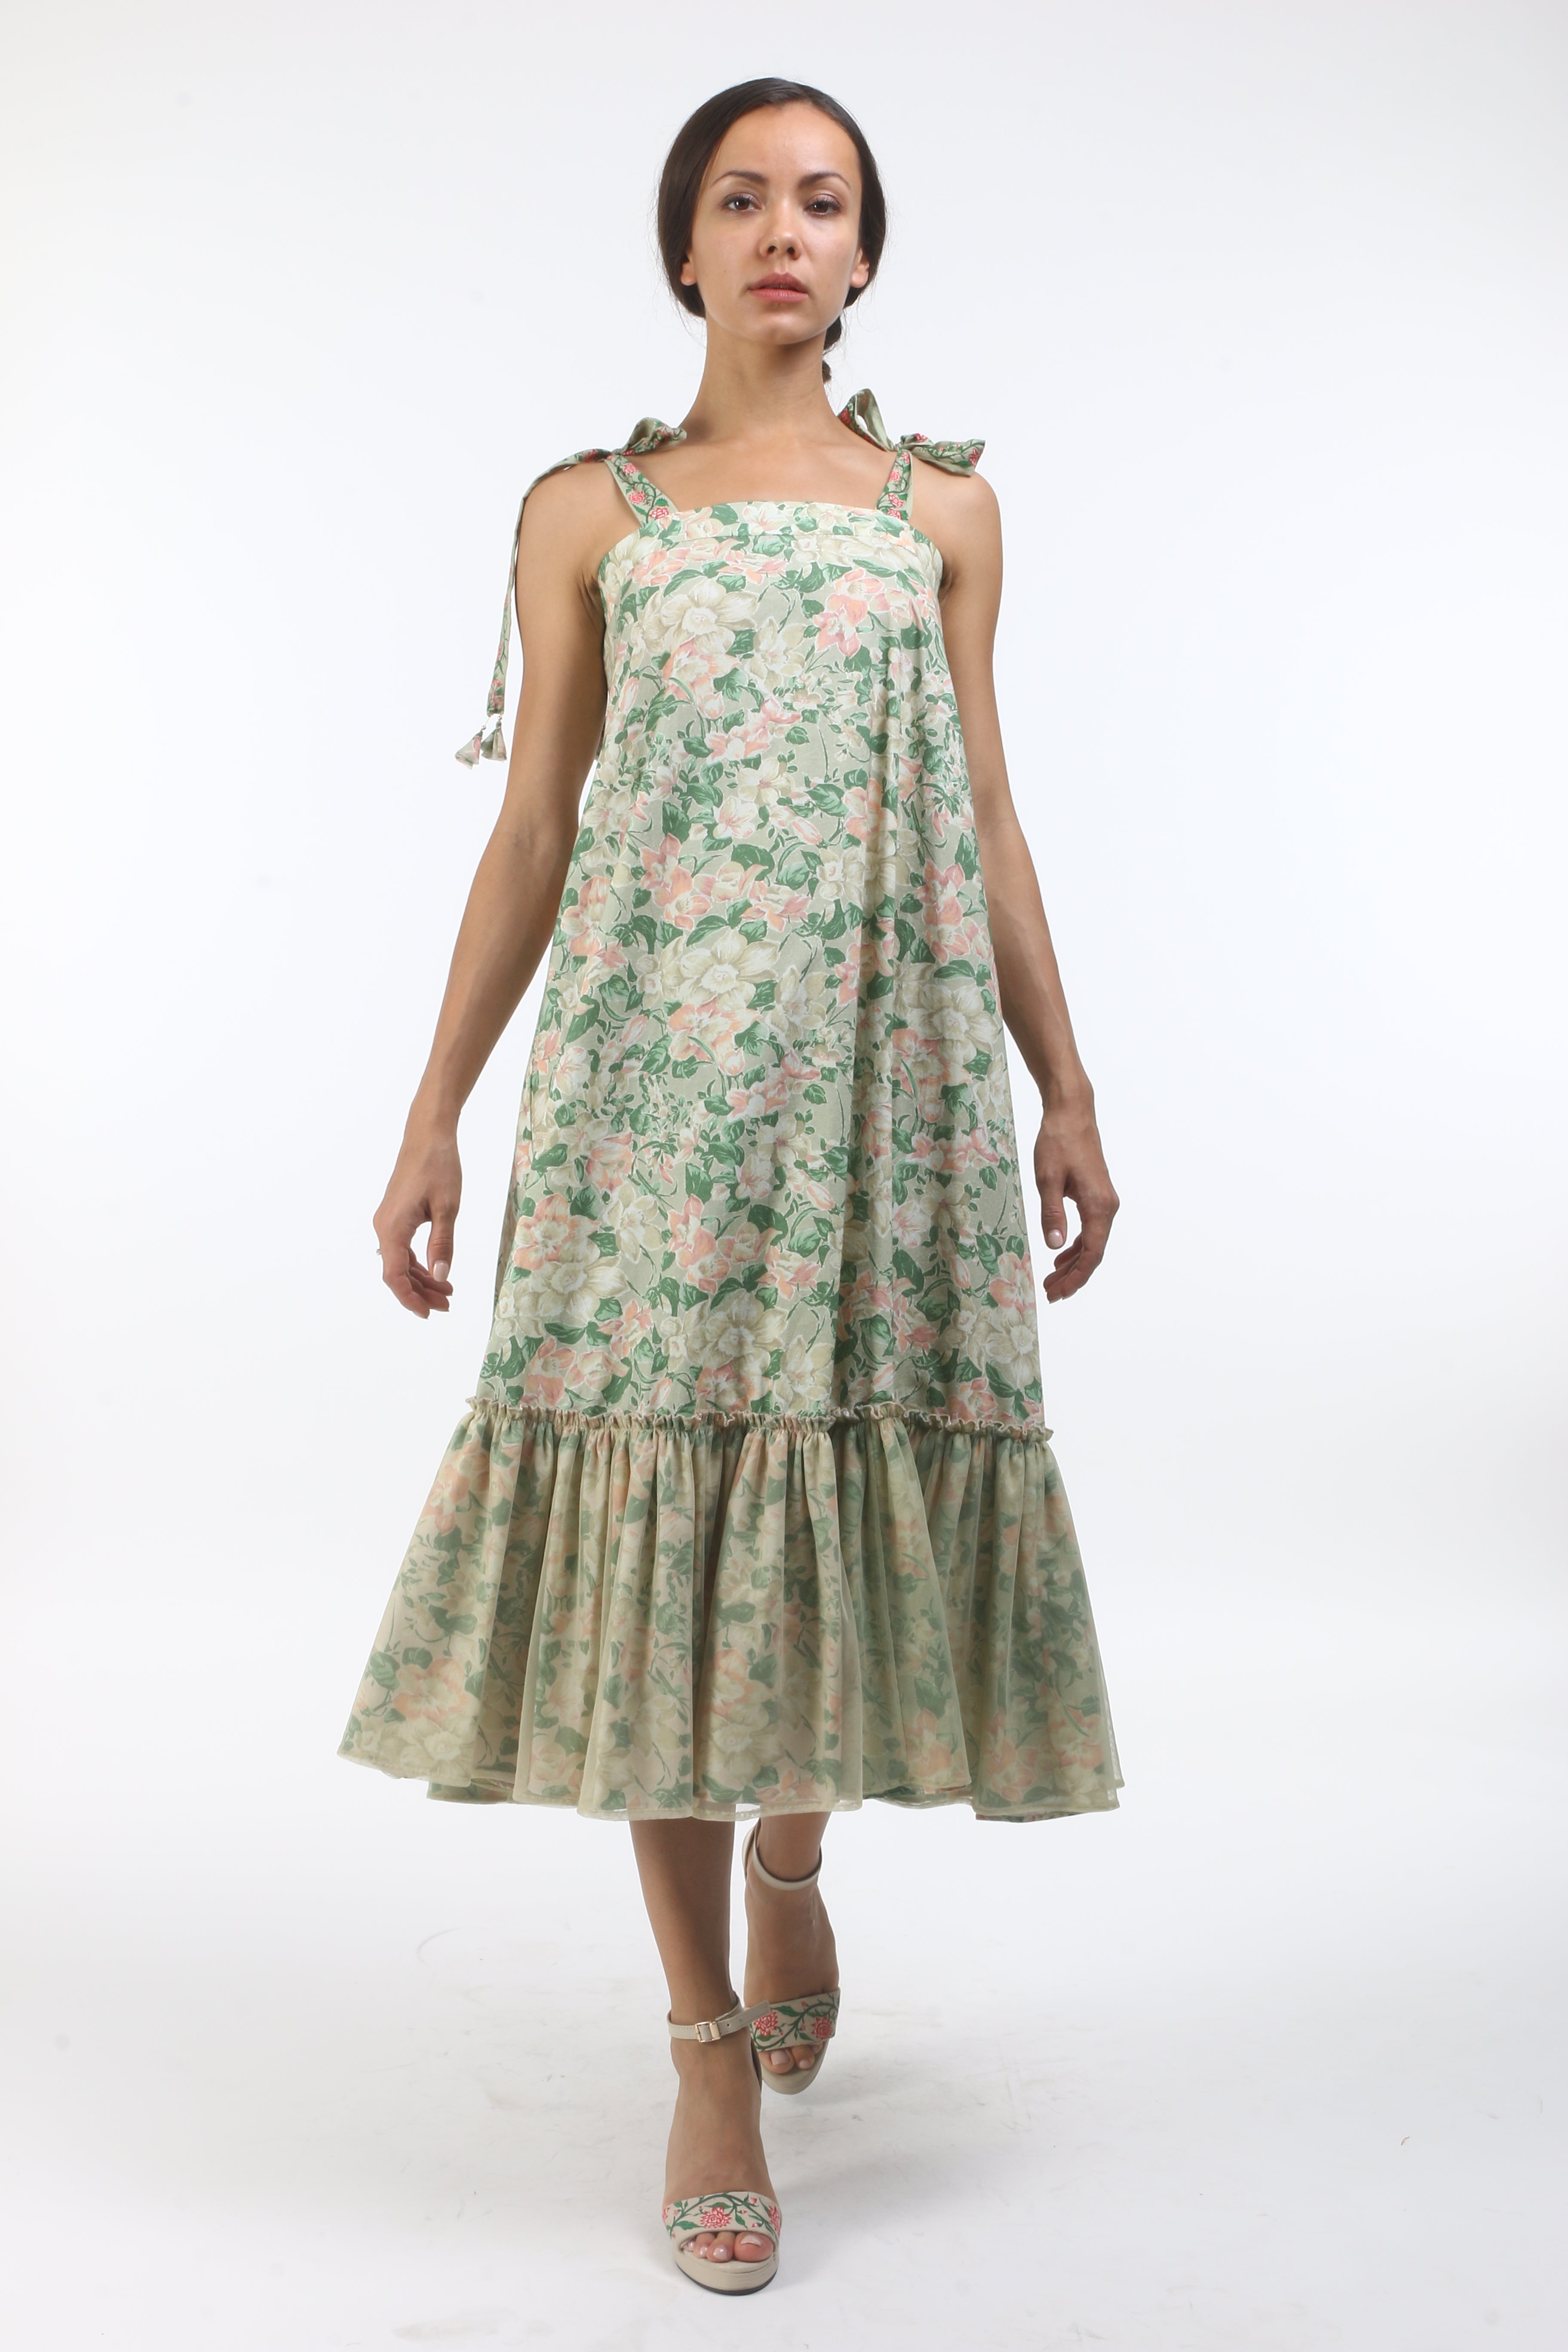 Bloom antique jade bibi jaal printed tie up dress with bloom tassels and tulle gathers.